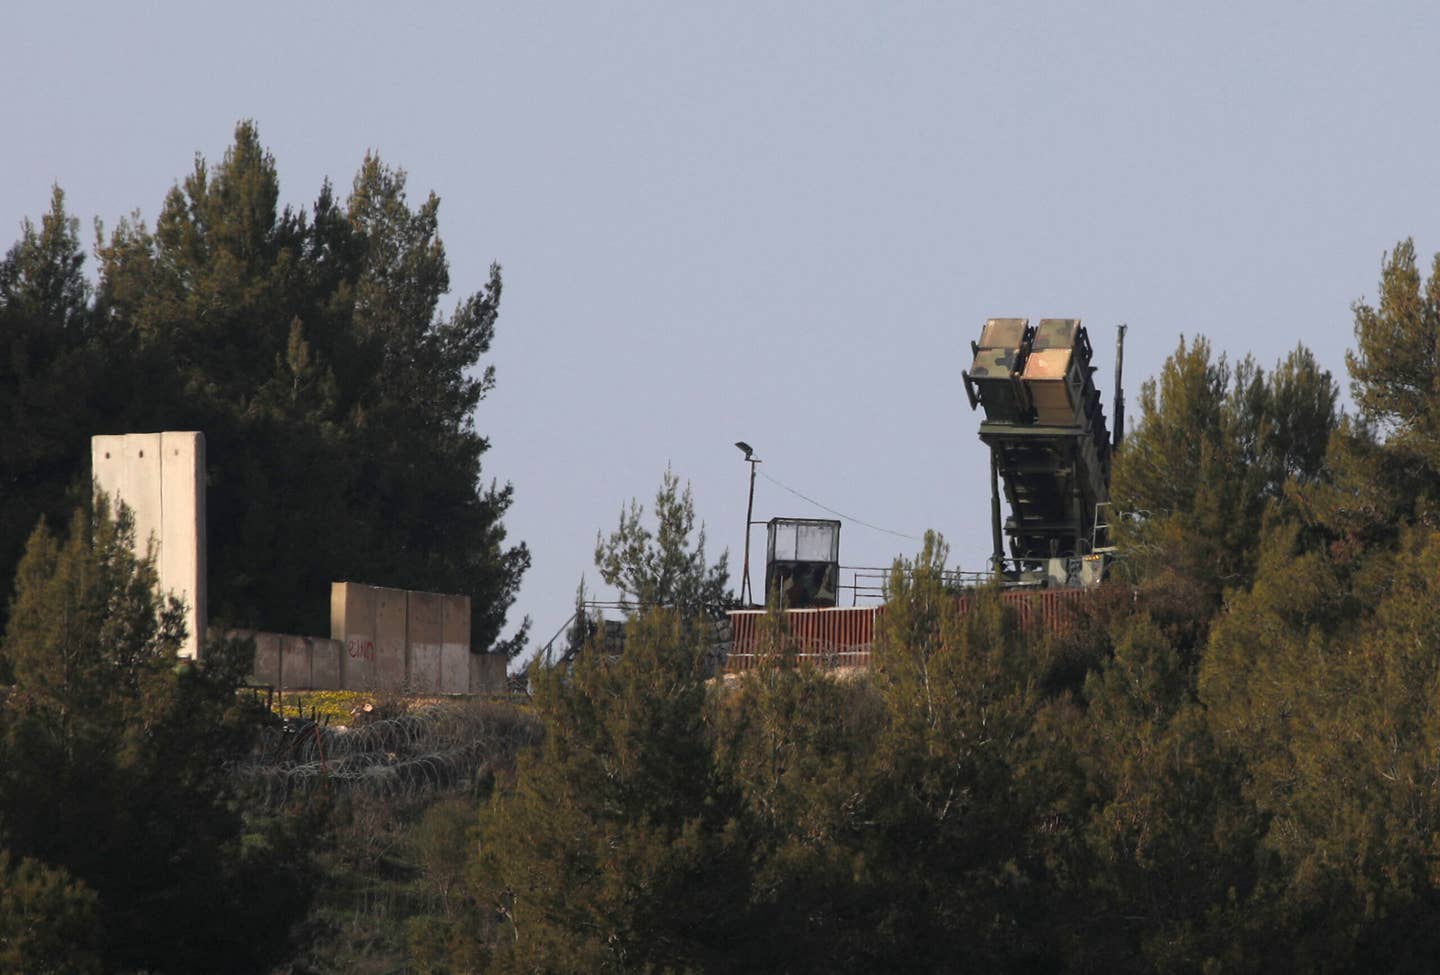 A Patriot surface-to-air missile battery near the border with Lebanon in northern Israel on February 18, 2022. <em>Photo by JALAA MAREY/AFP via Getty Images</em>